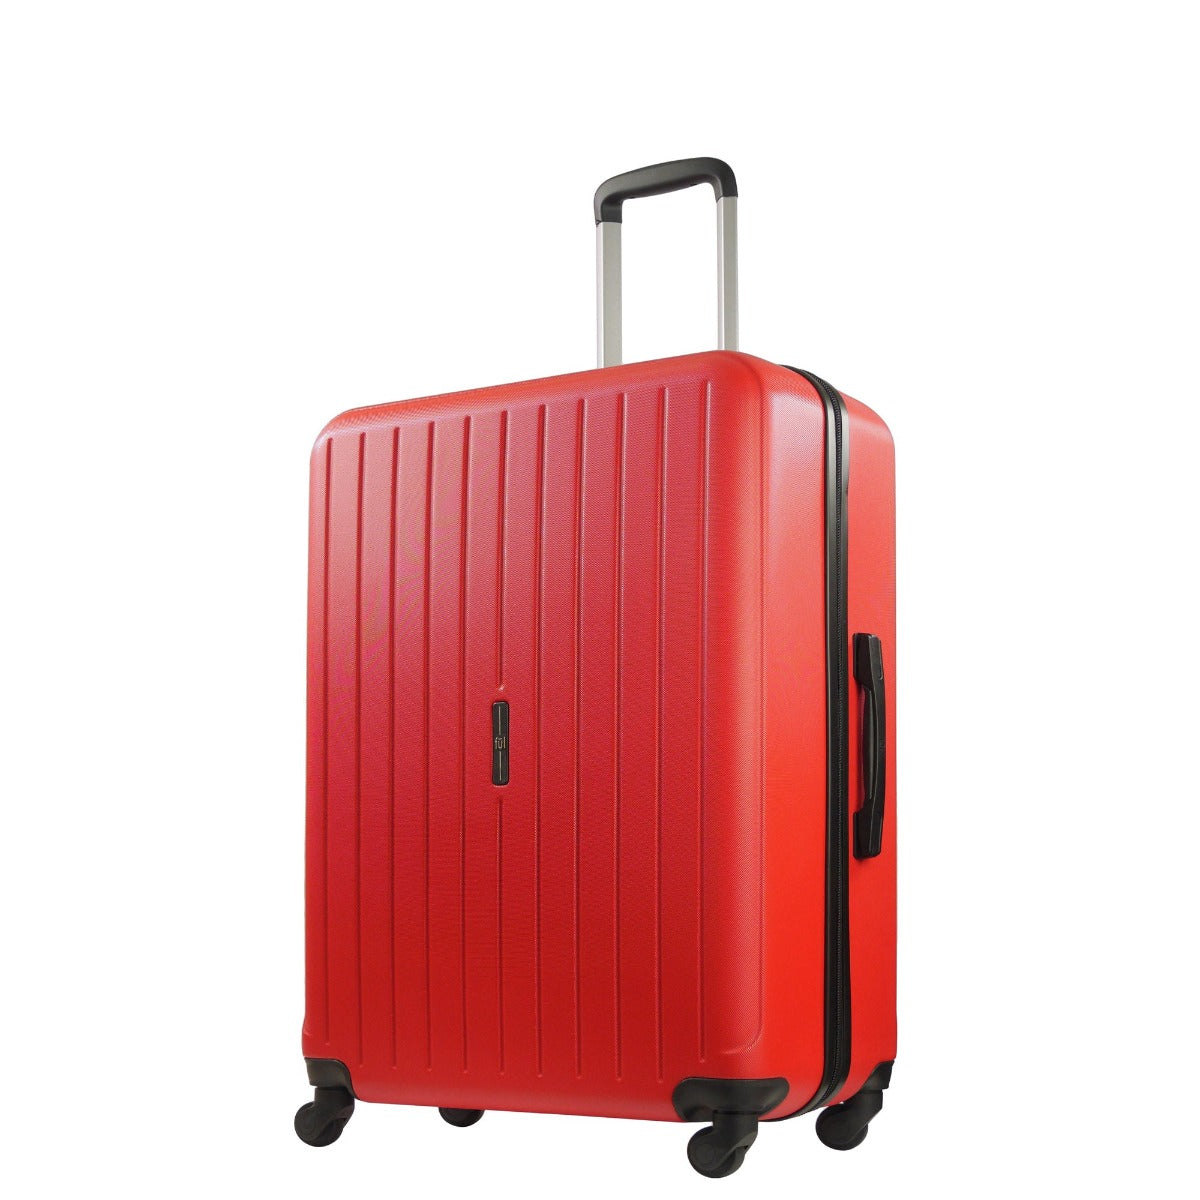 Ful Pure II  31" large hard-side spinner red luggage